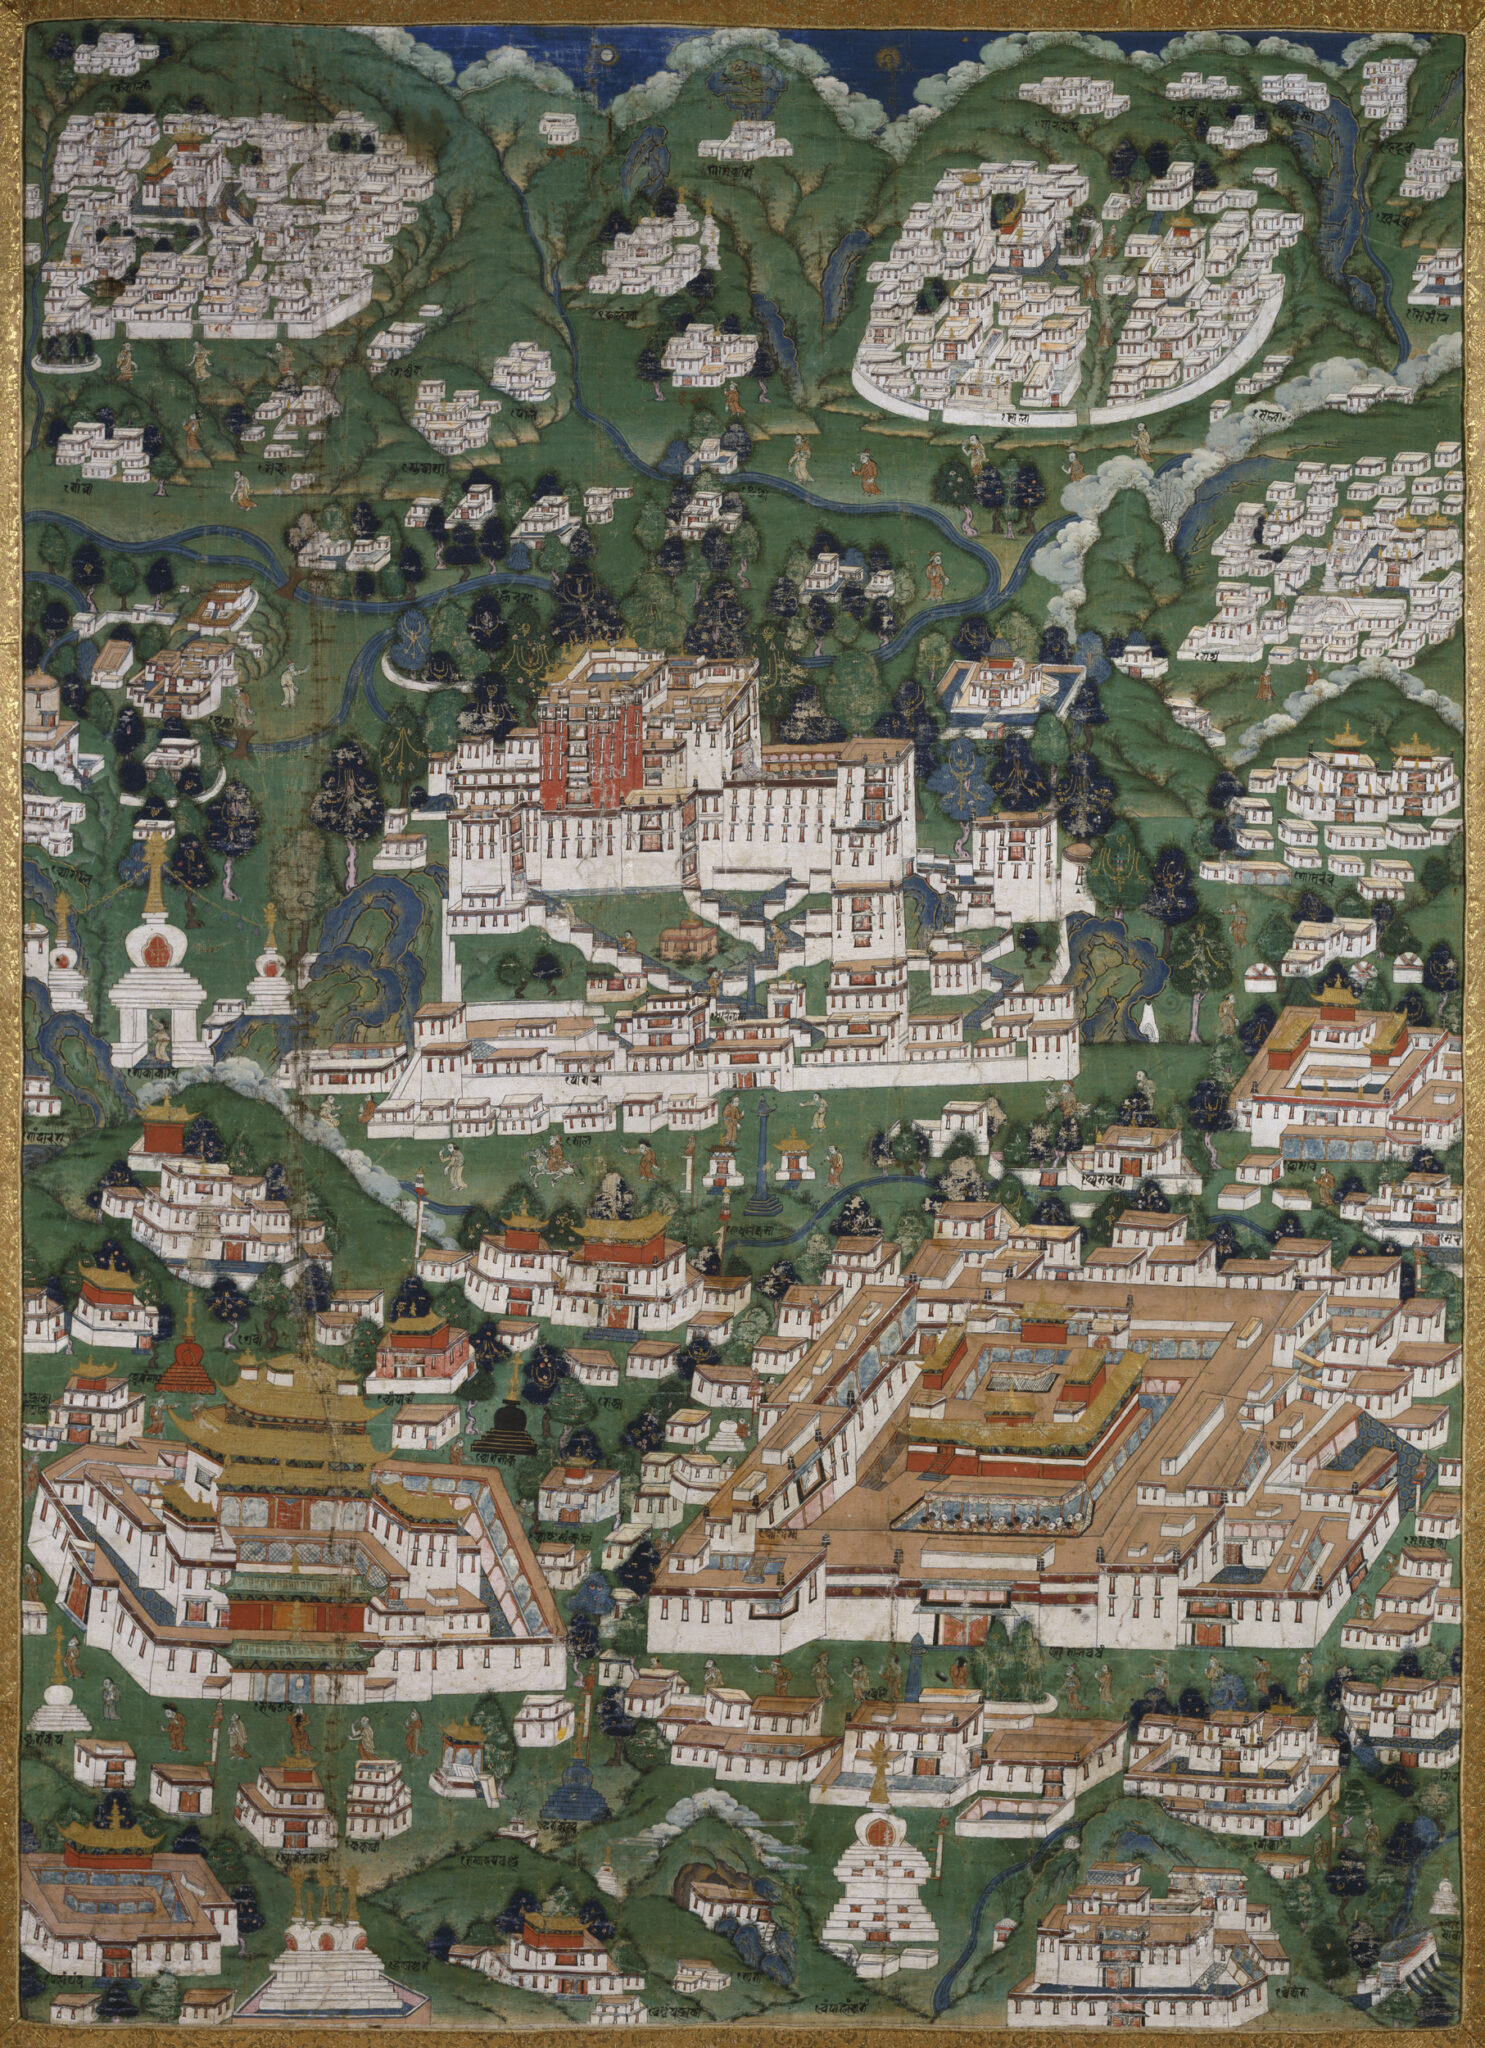 Painting depicting hilltop palace surrounded by prominent building complexes and settlements situated in green landscape